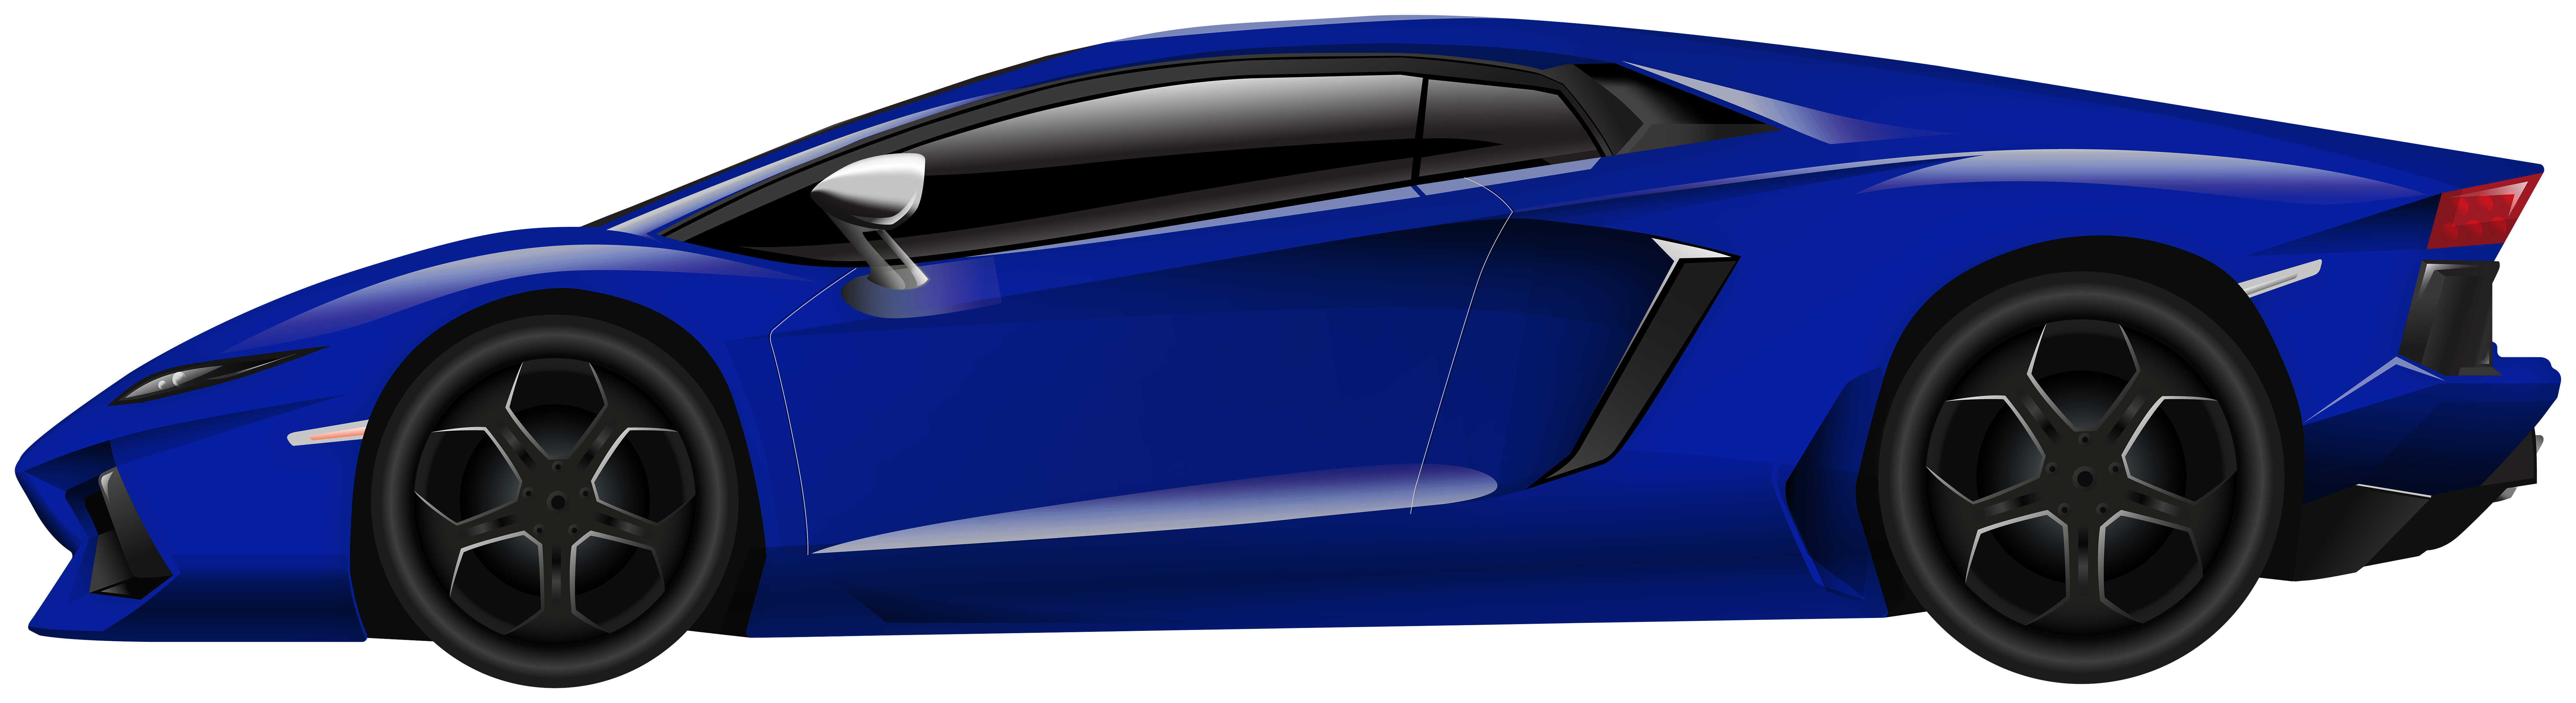 blue car side view png